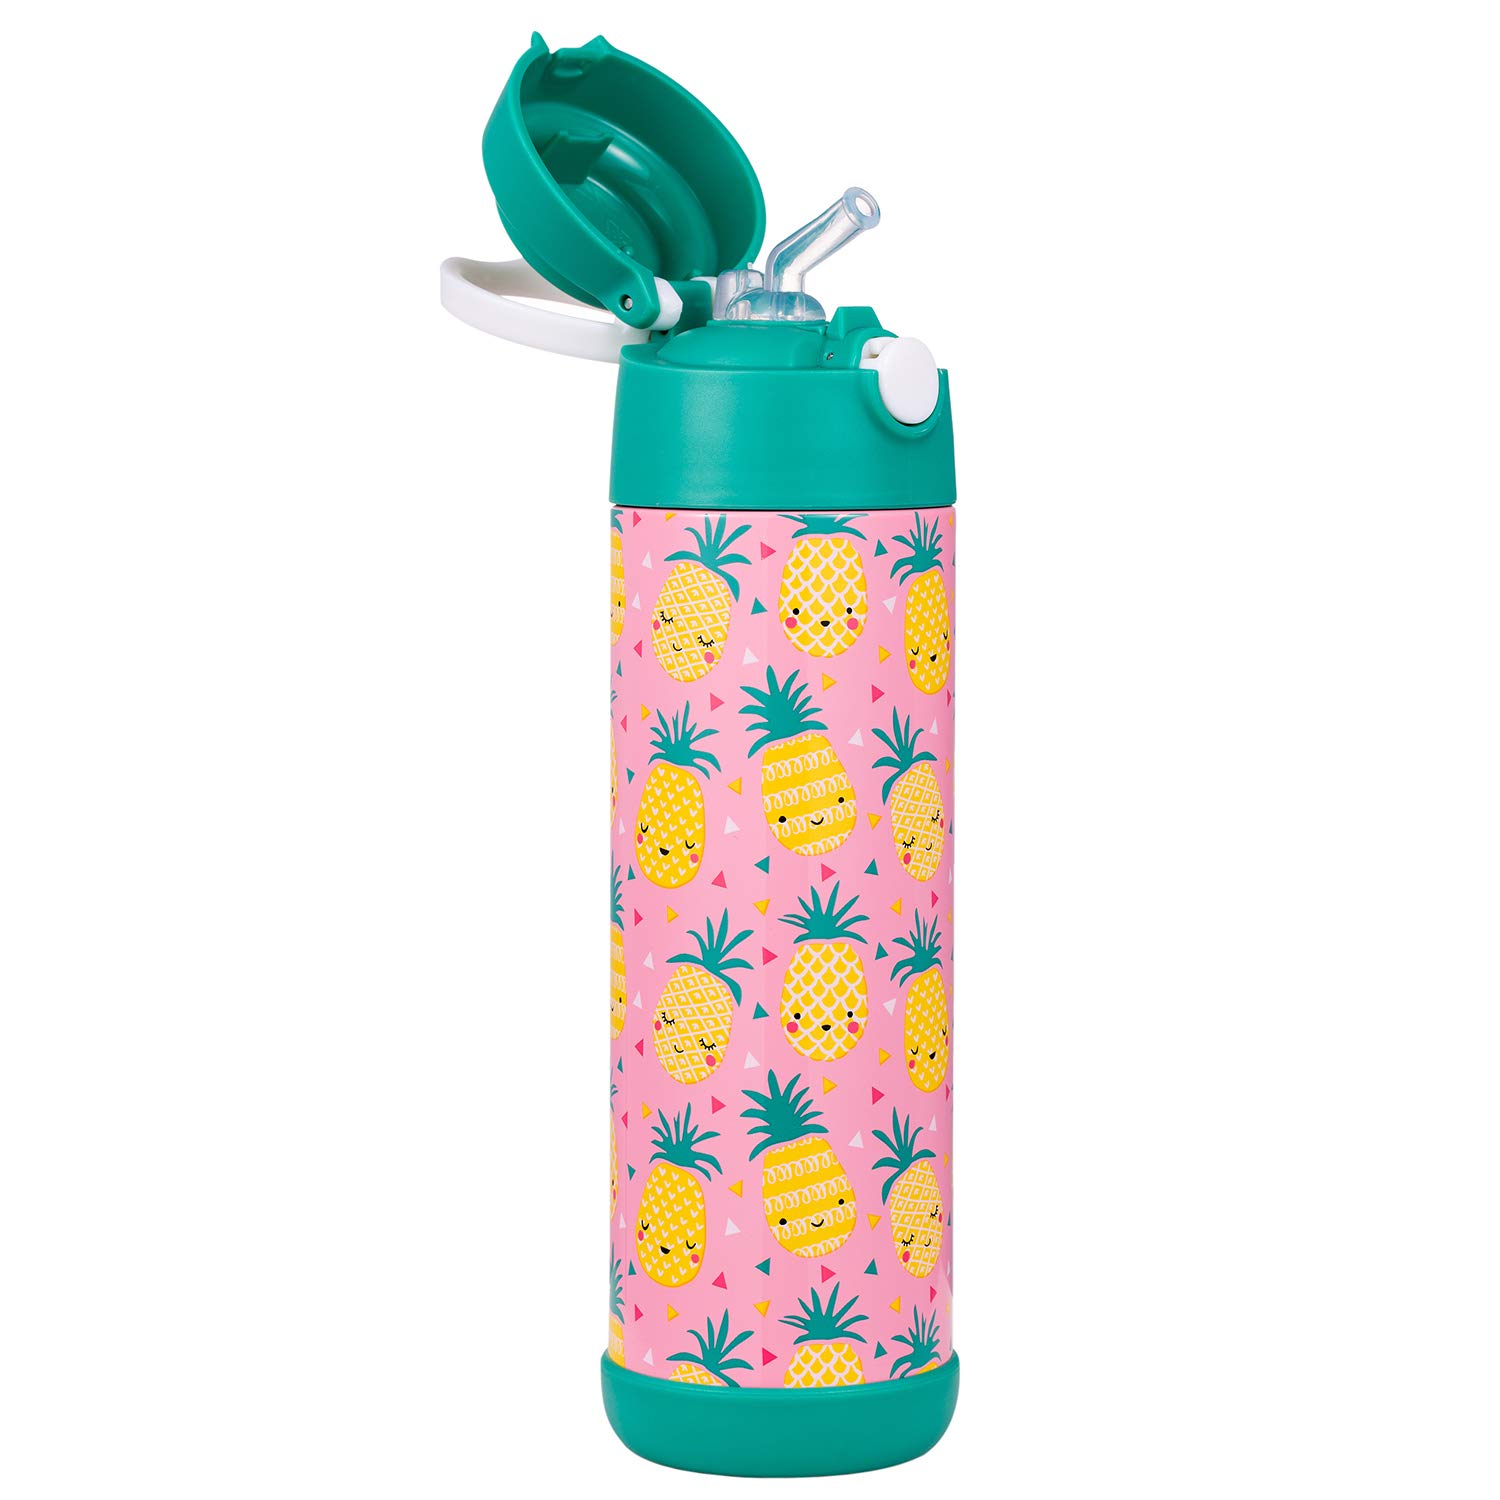 Vacuum Insulated Water Bottle with Straw Camo Snug Flask for Kids 